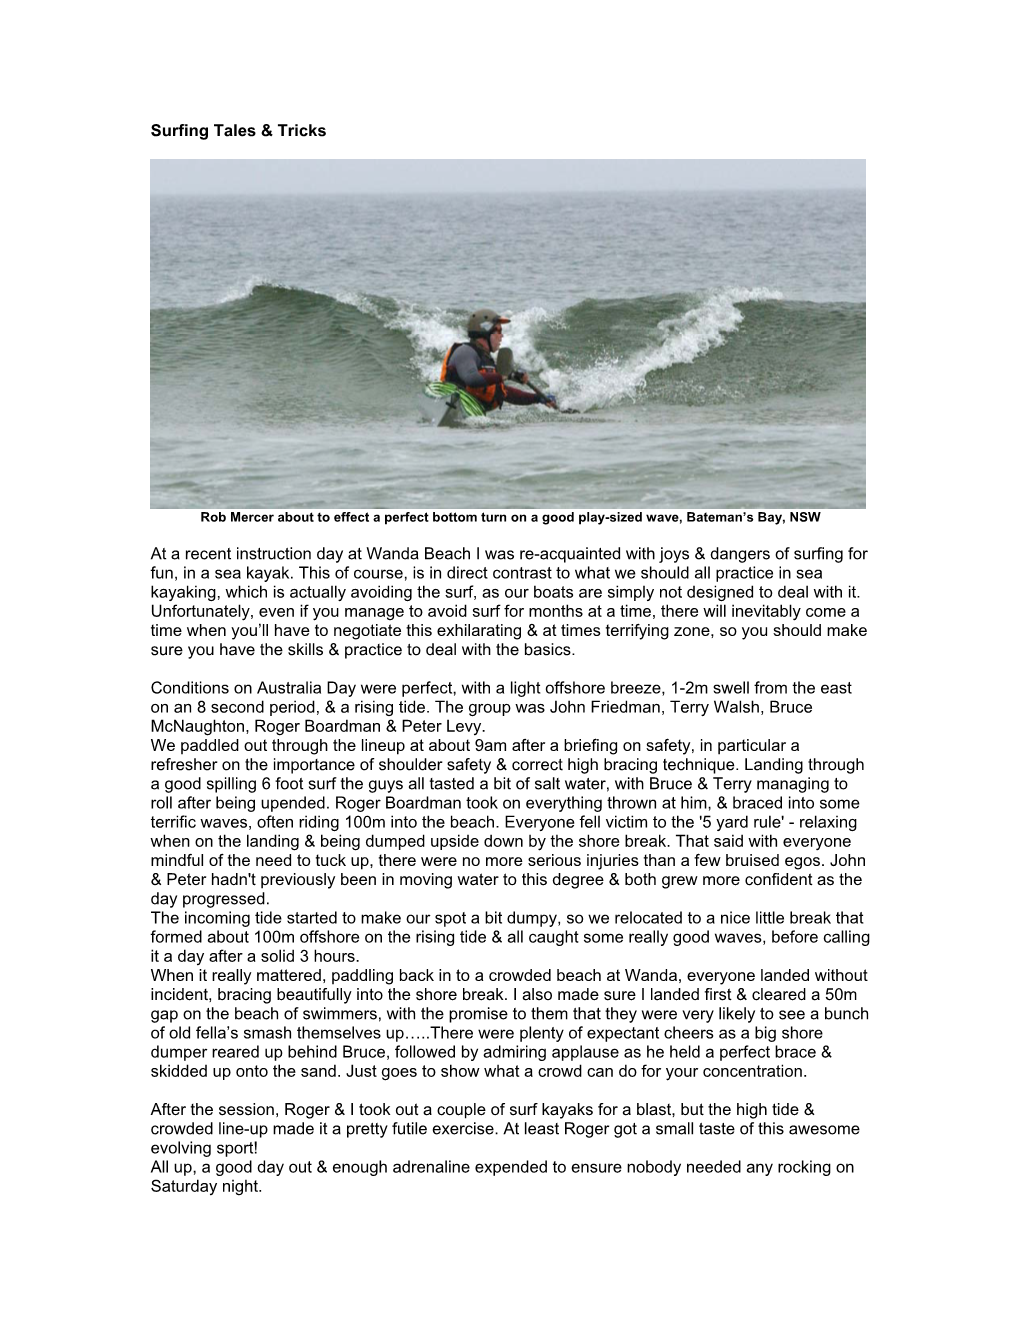 Surfing Tales & Tricks at a Recent Instruction Day at Wanda Beach I